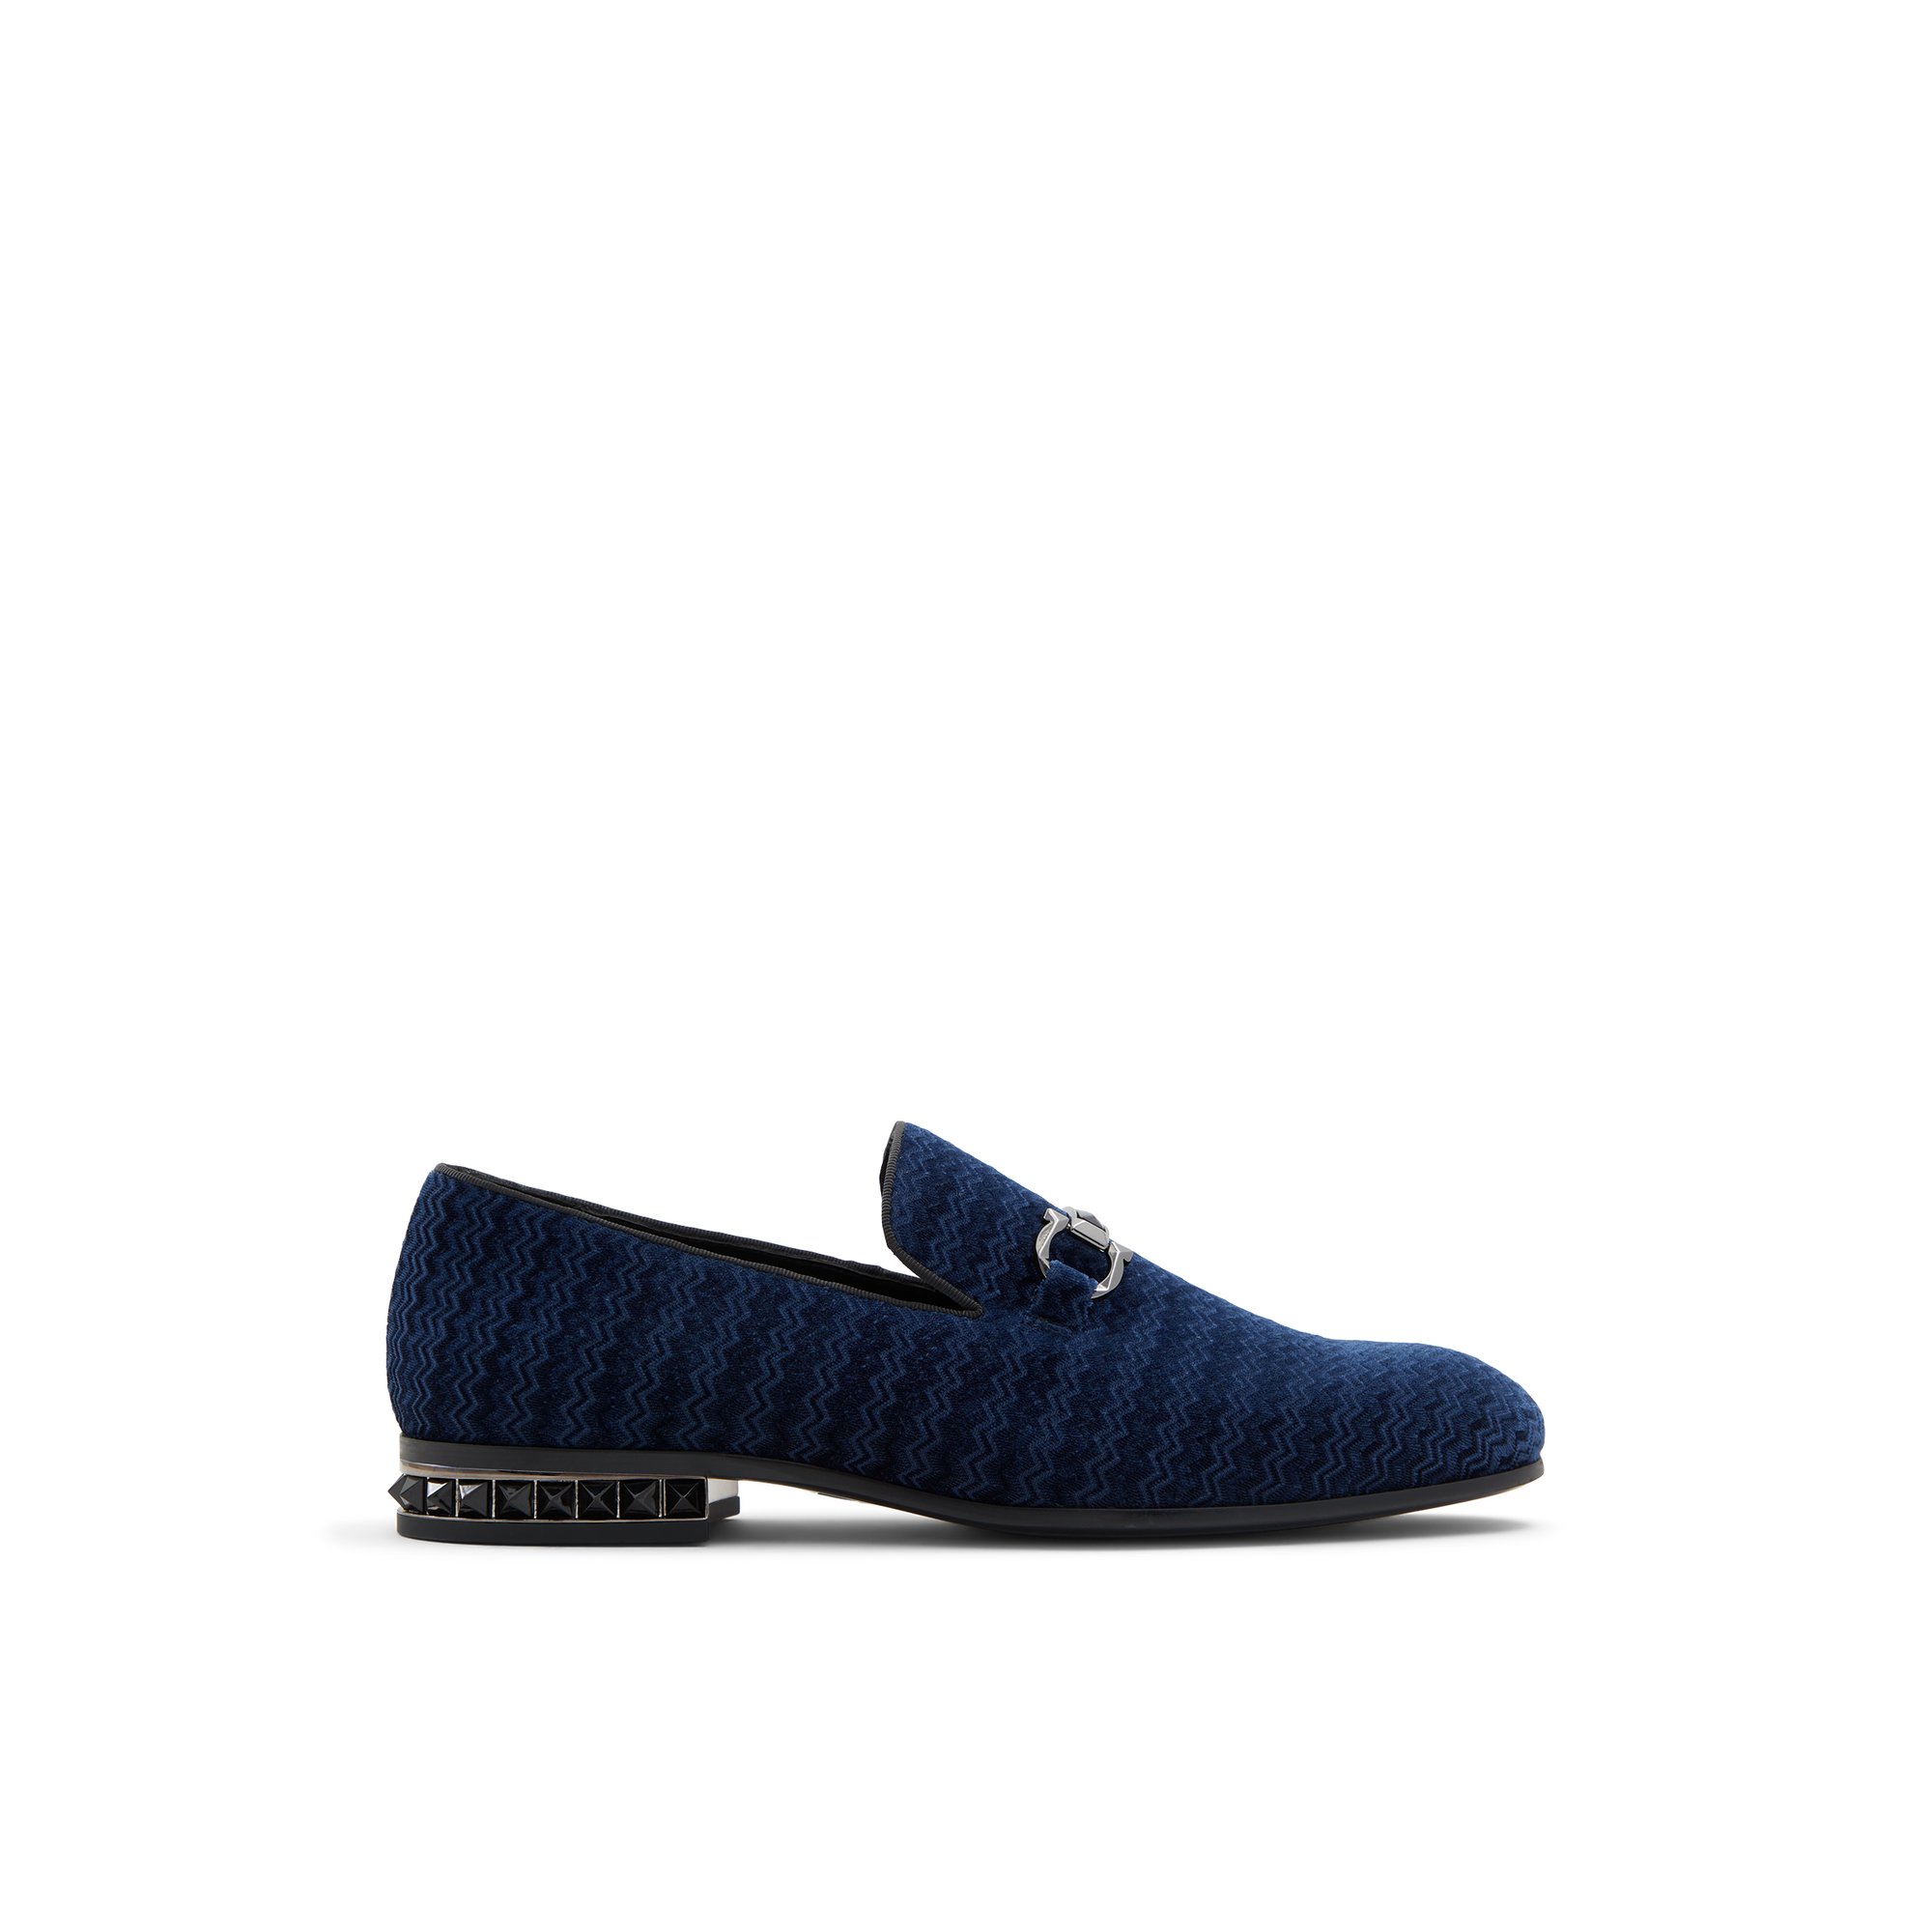 ALDO Bowtie - Men's Loafers and Slip on - Blue